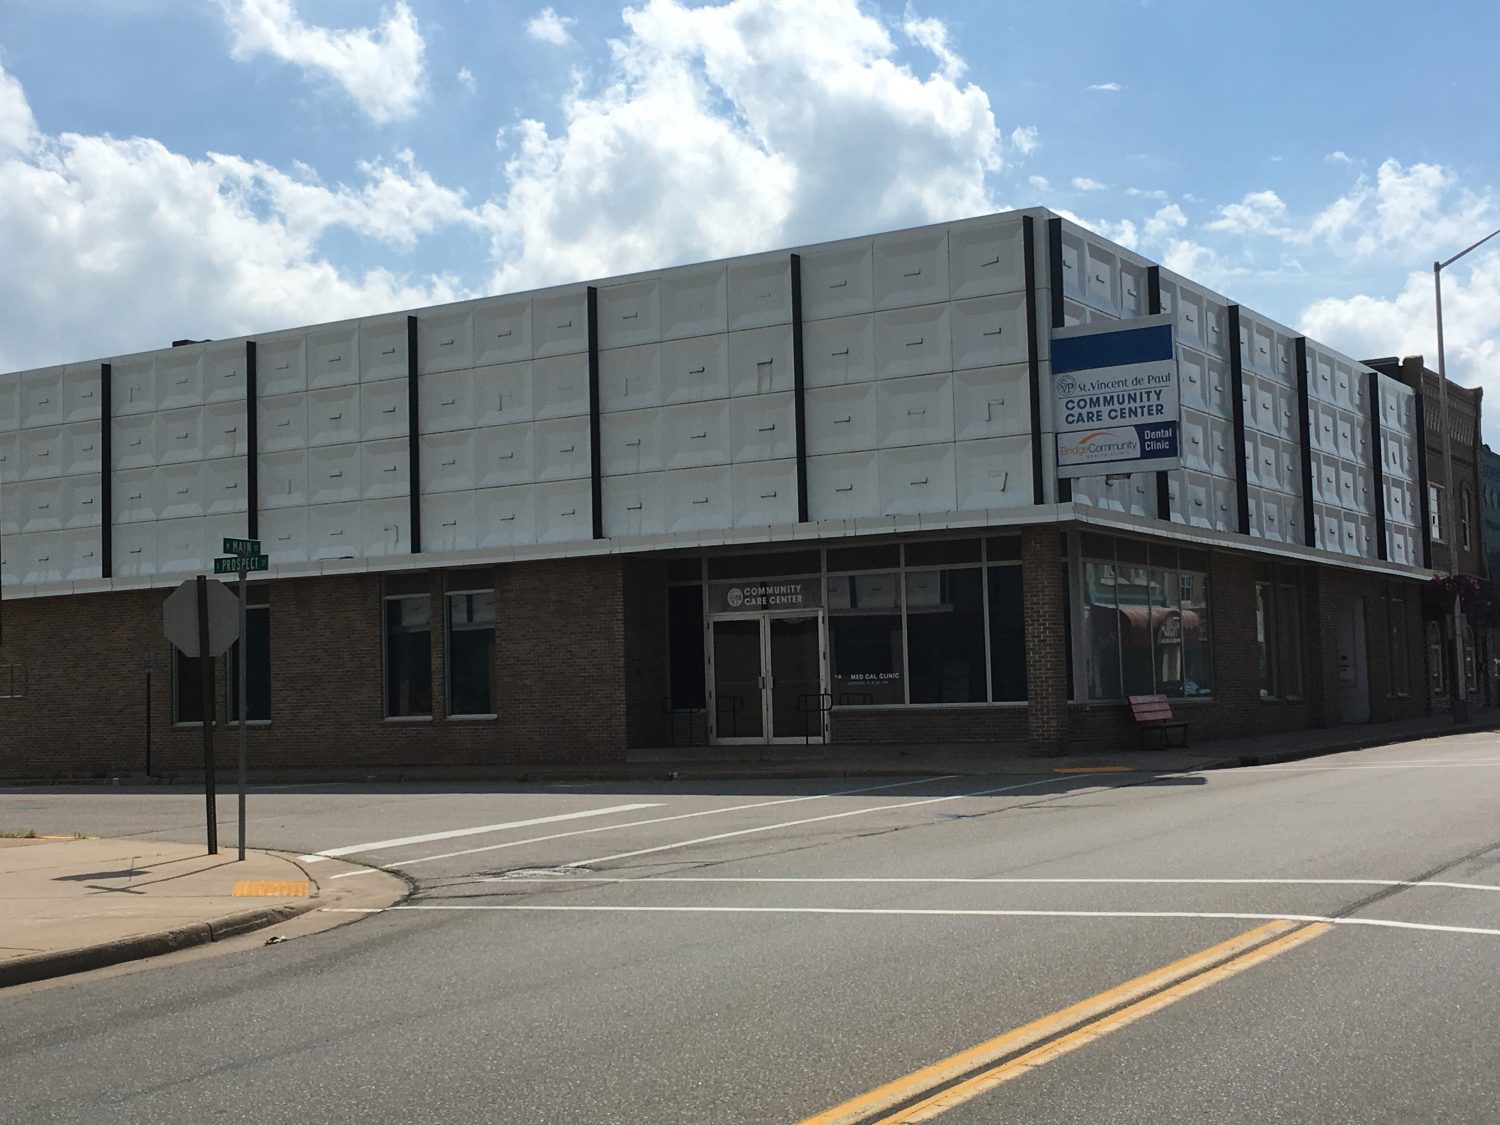 City eyes blighted former bank property